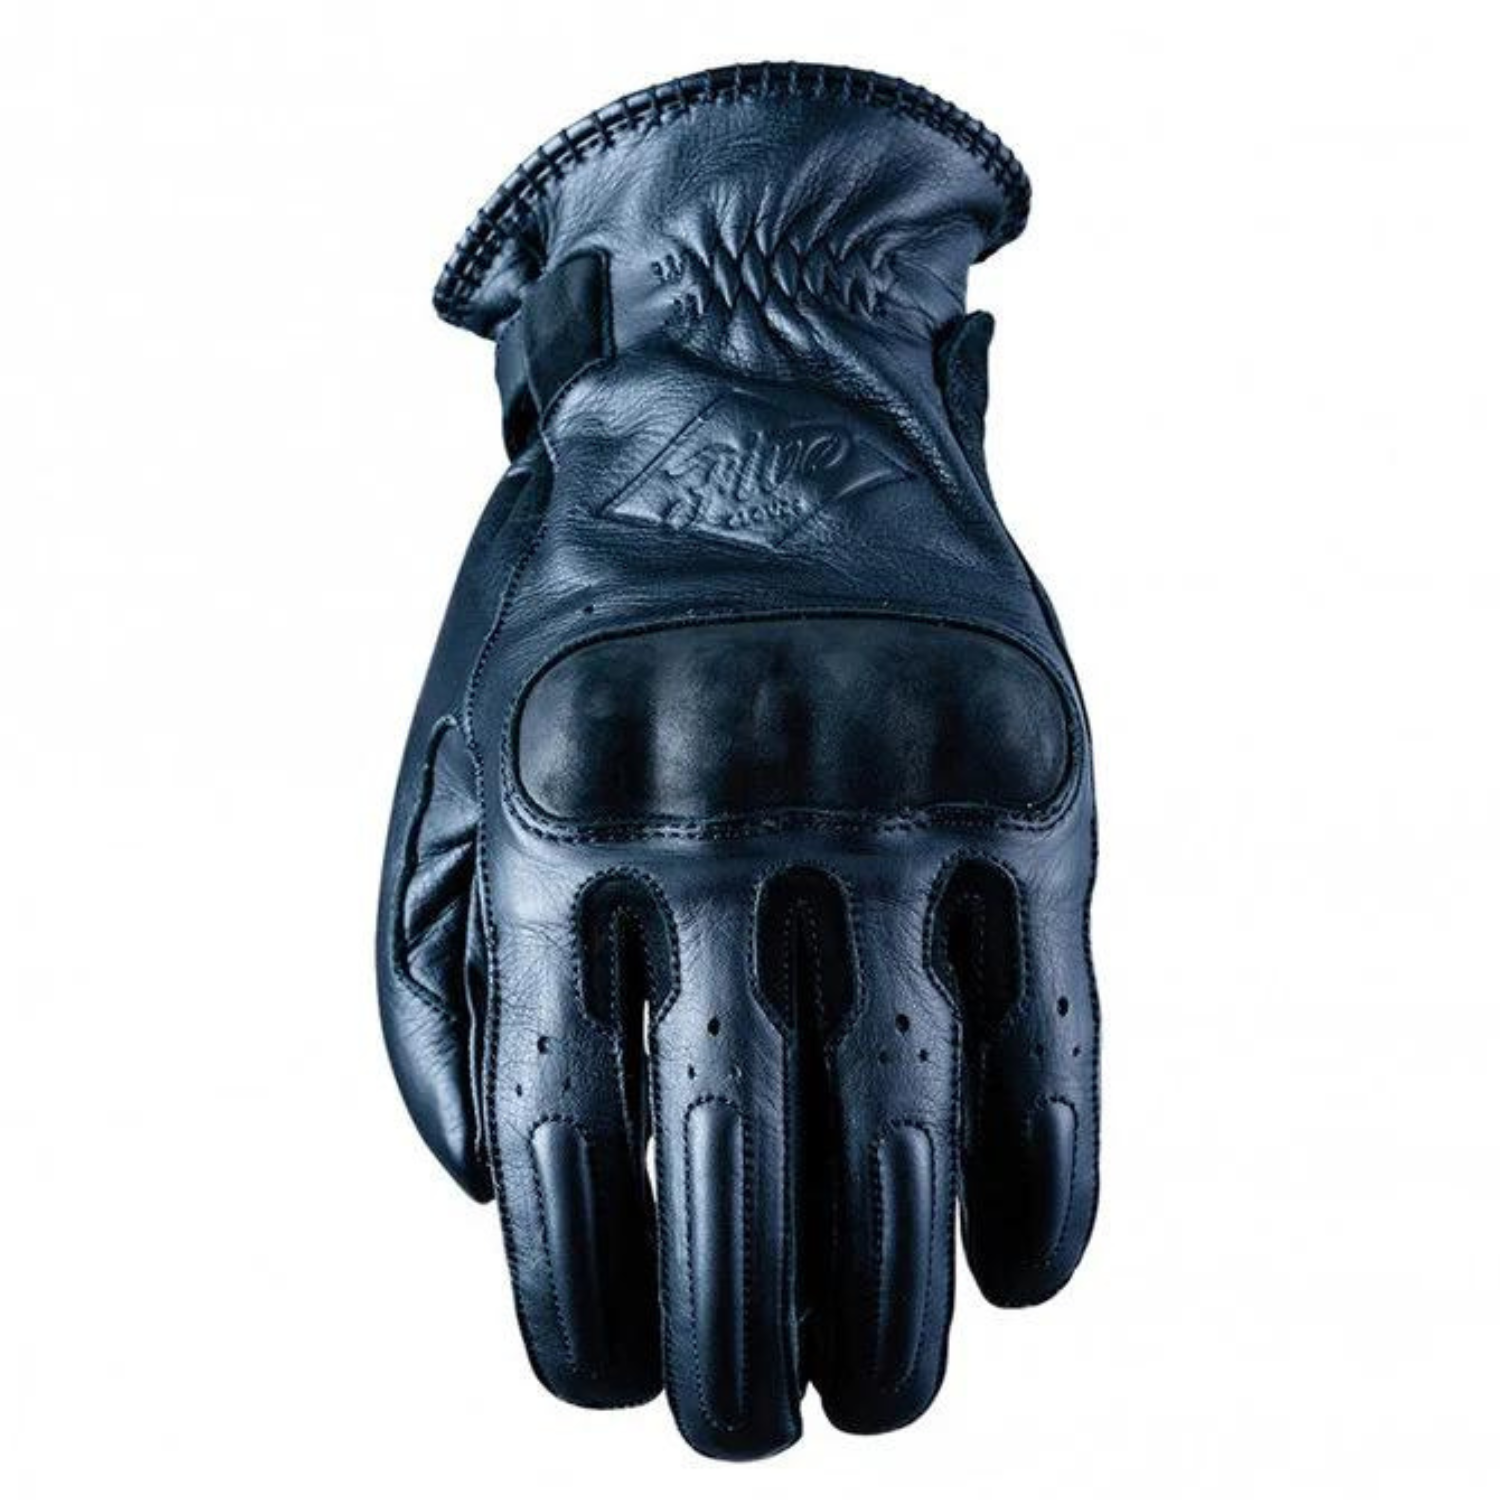 Image of Five Oklahoma Gloves Black Size 3XL ID 4770916487634